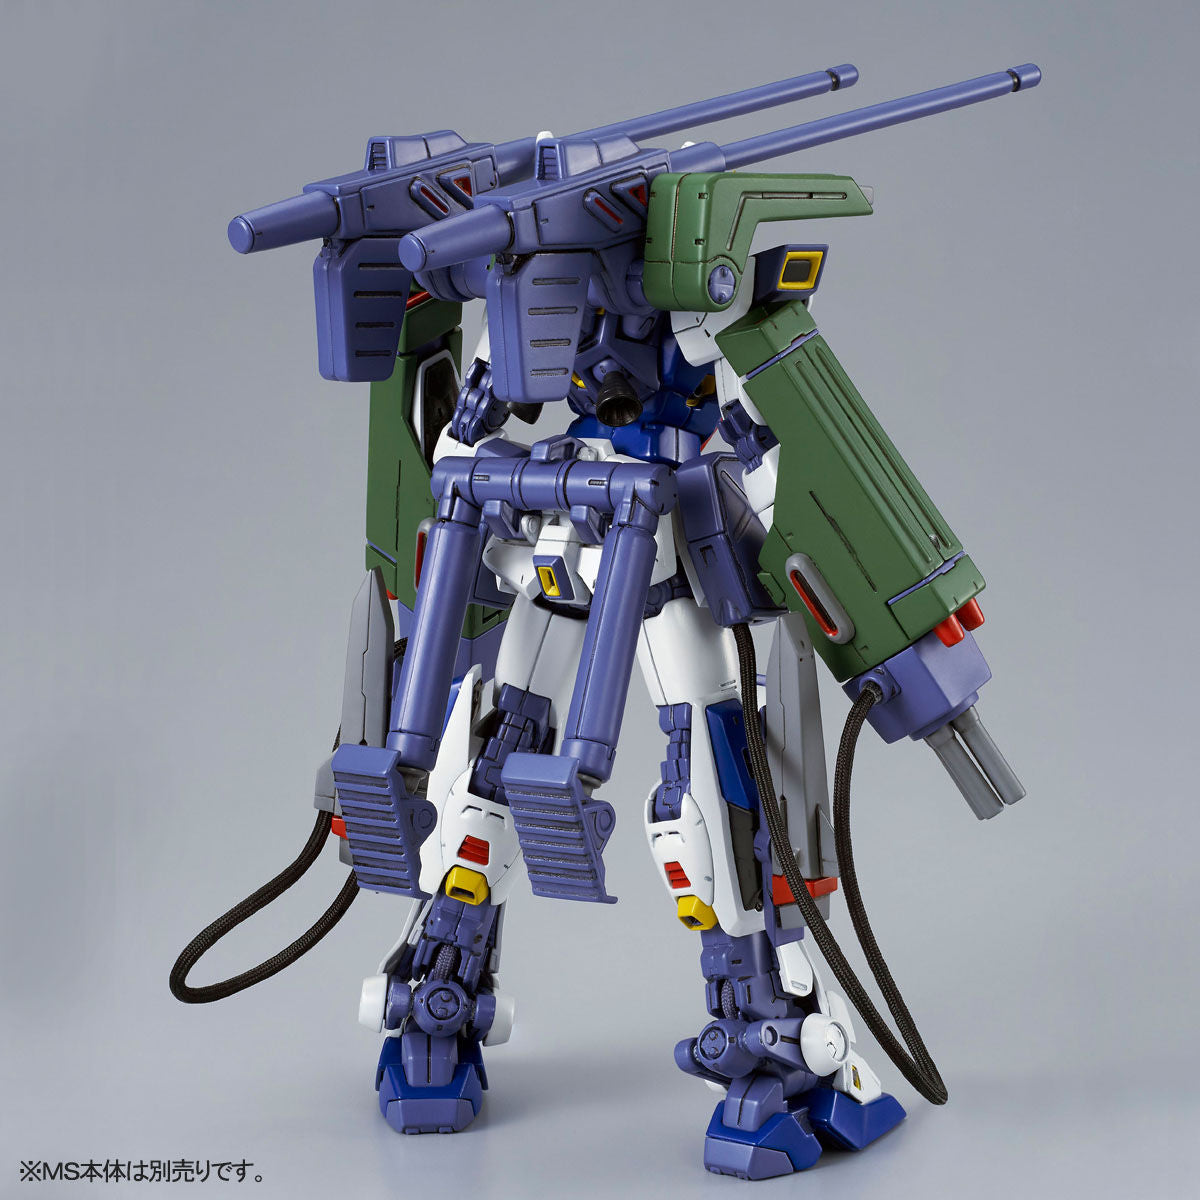 Mission Pack E Type & S Type for MG 1/100 Gundam F90 (March & April Ship Date)